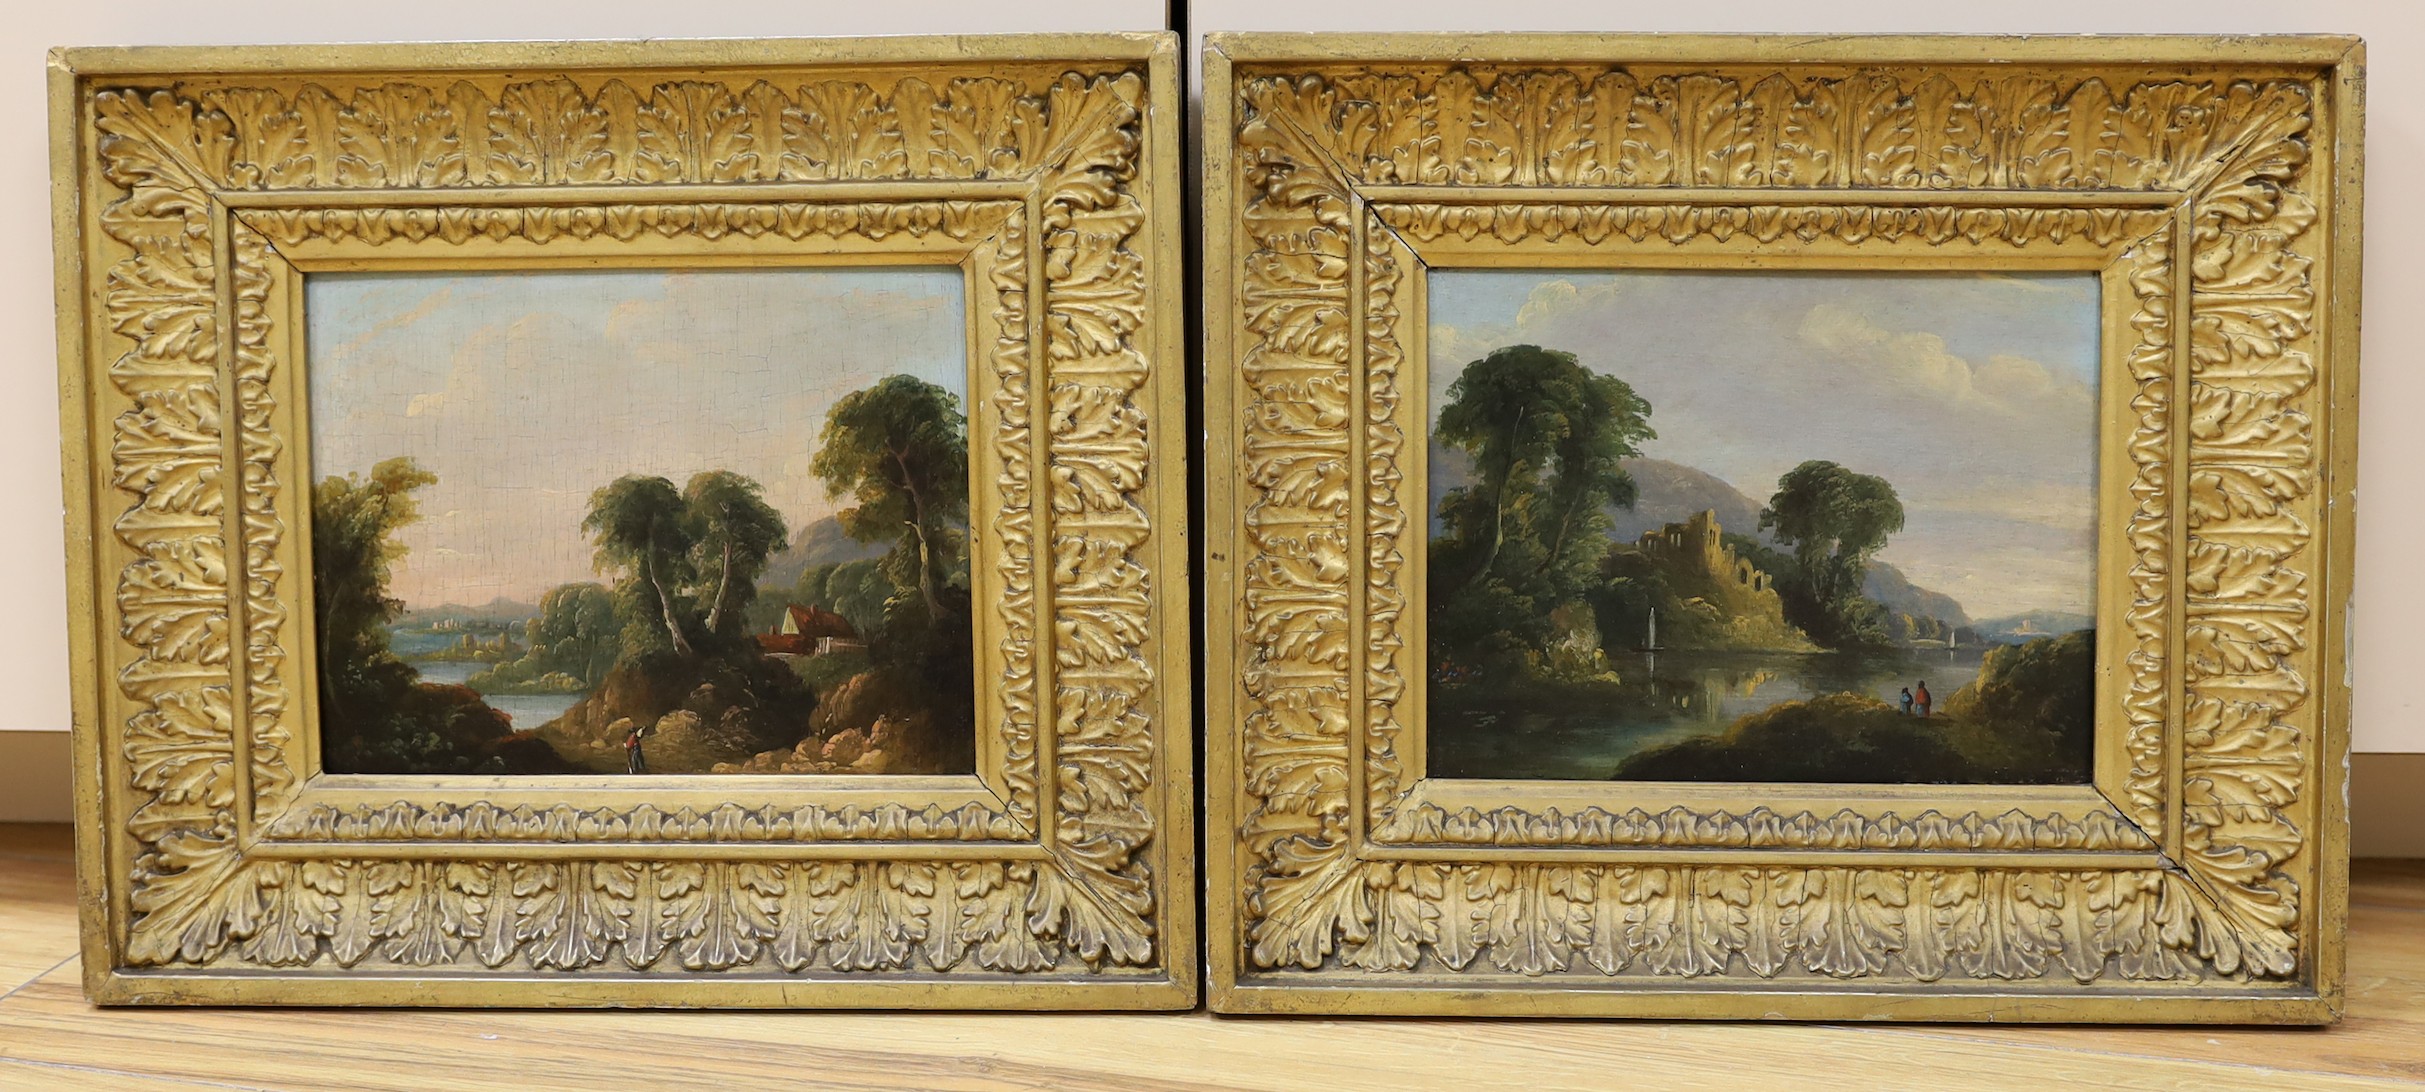 J. Williams, Liverpool (19th C.), pair of oils on wooden panels, Landscapes with travellers and ruins, 17 x 22cm